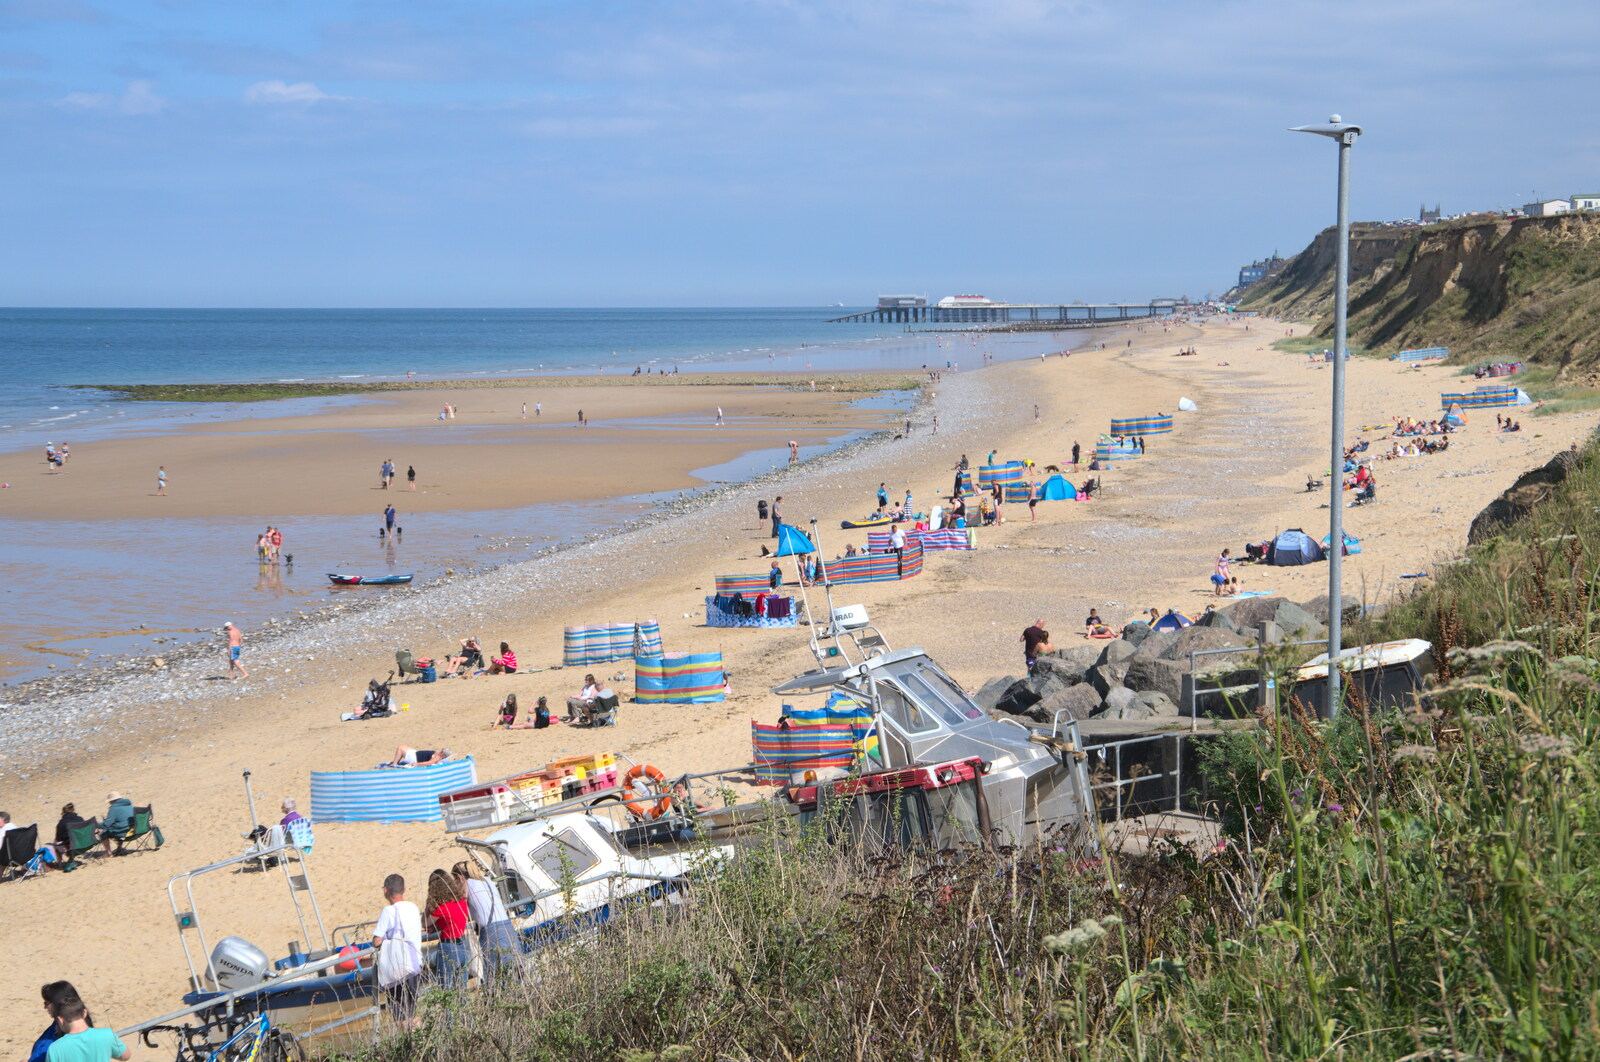 The beach at West Runton from Camping on the Coast, East Runton, North Norfolk - 25th July 2020